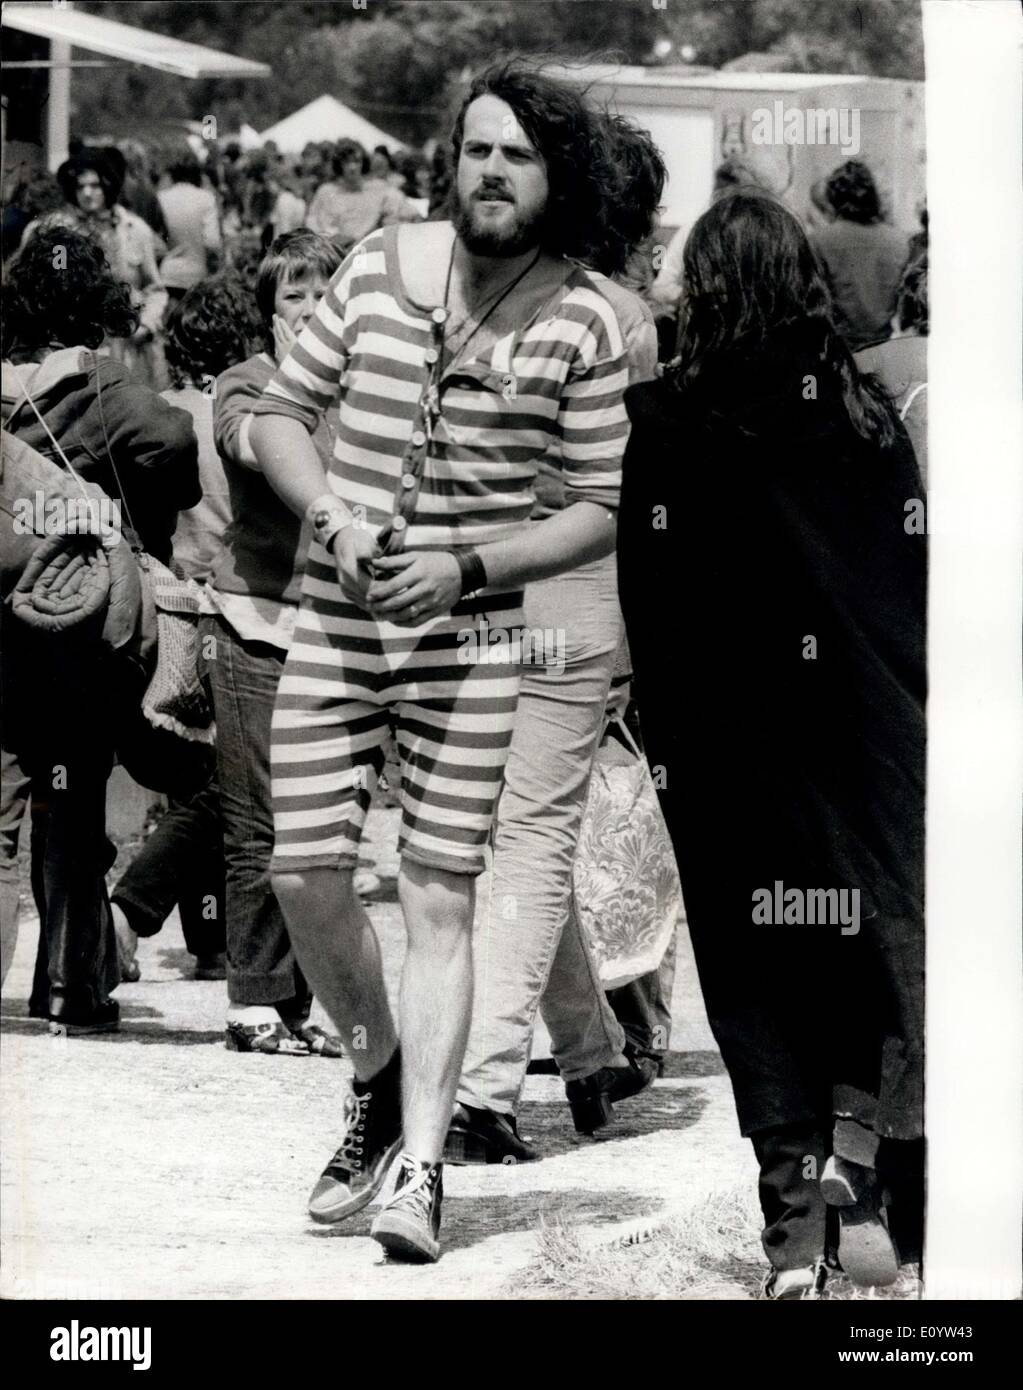 Jun. 27, 1971 - Hieppie' Police seize 100 pop fans at a Pop Festival in reading: Detectives in hippie gear searched hundred of teenagers for drugs at the Reading Pop Festival yesterday, and more than 100 fans were arrested. It was estimated that some 20,000 fans attended, many of them comped out all night despite the heavy rain. Photo Shows One of the pop fans dressed in an old fashioned bathing suit at the Pop Festival yesterday. Stock Photo